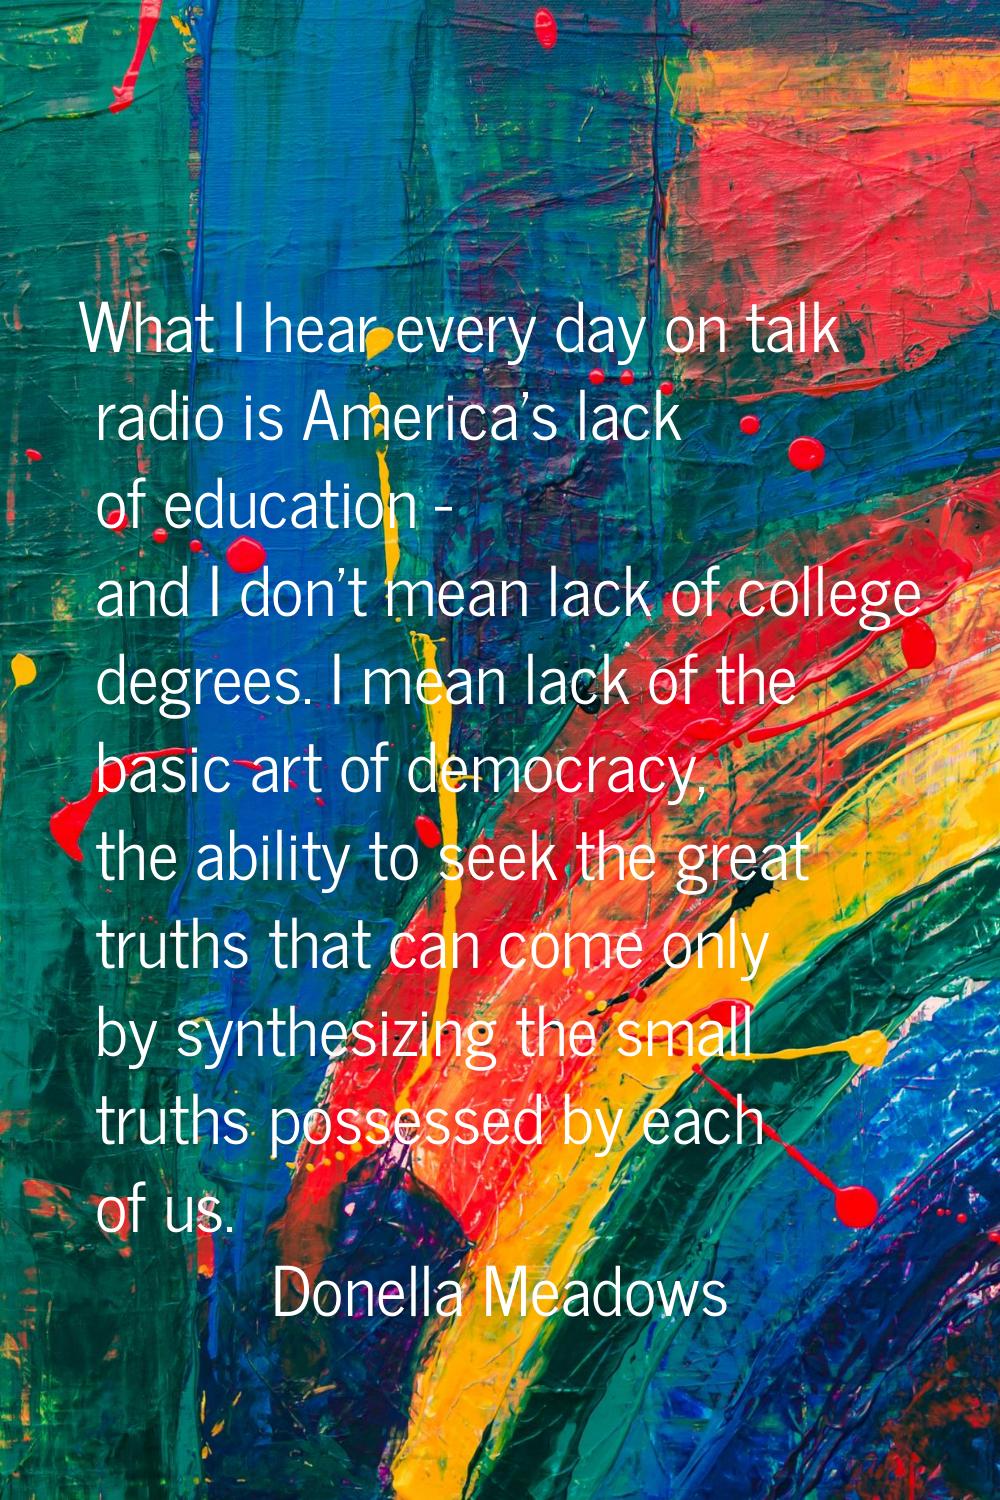 What I hear every day on talk radio is America's lack of education - and I don't mean lack of colle